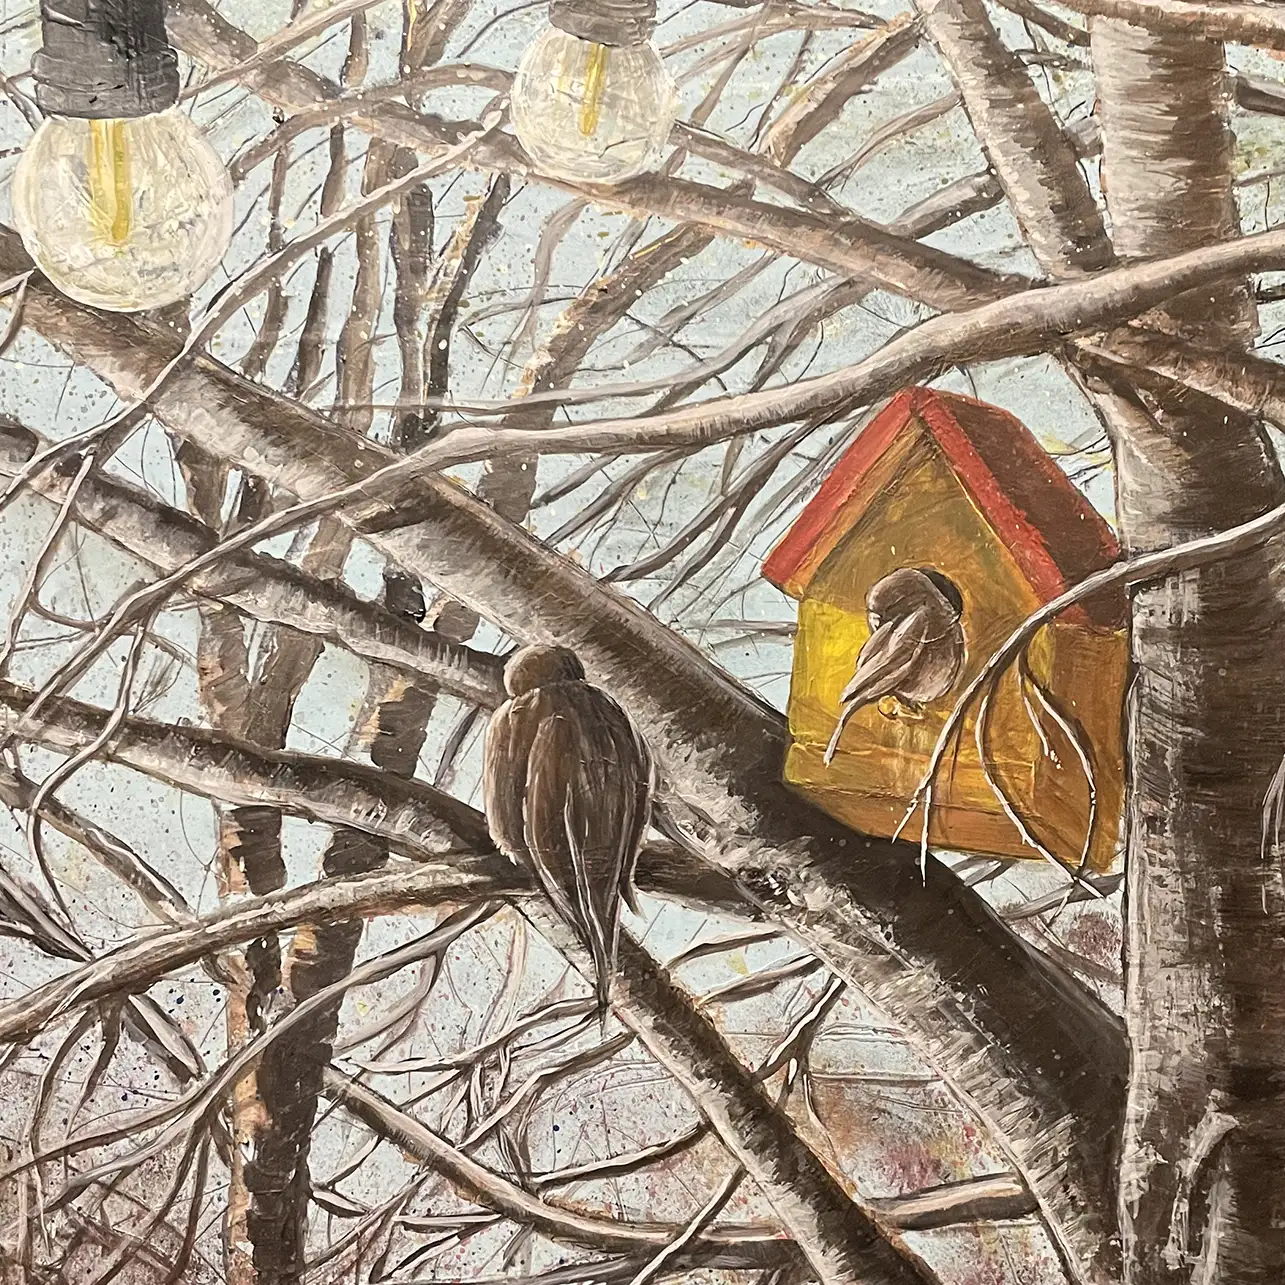 Birdhouse painting by RCi